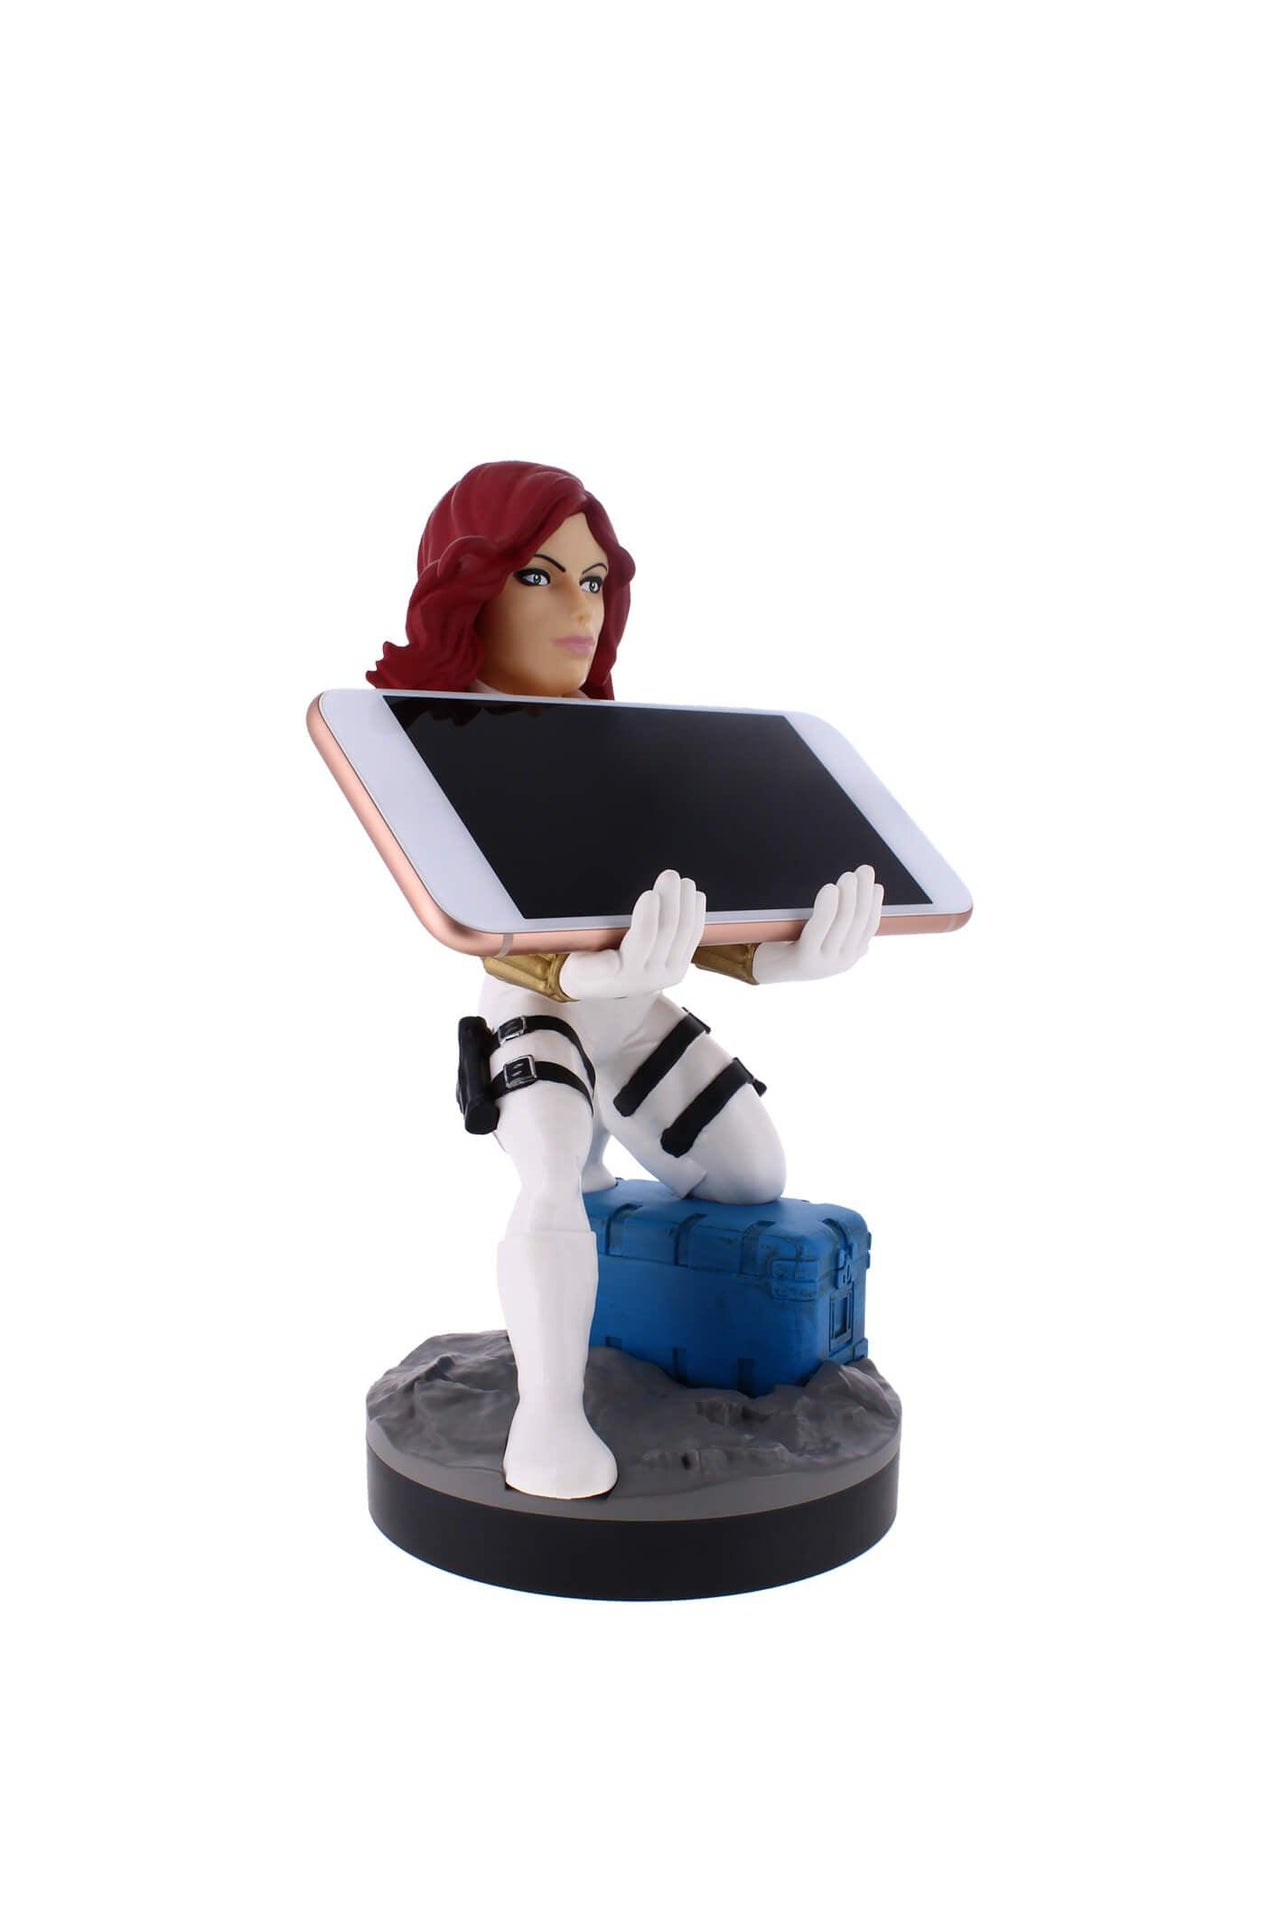 Black Widow White Suit Cable Guy Phone and Controller Holder